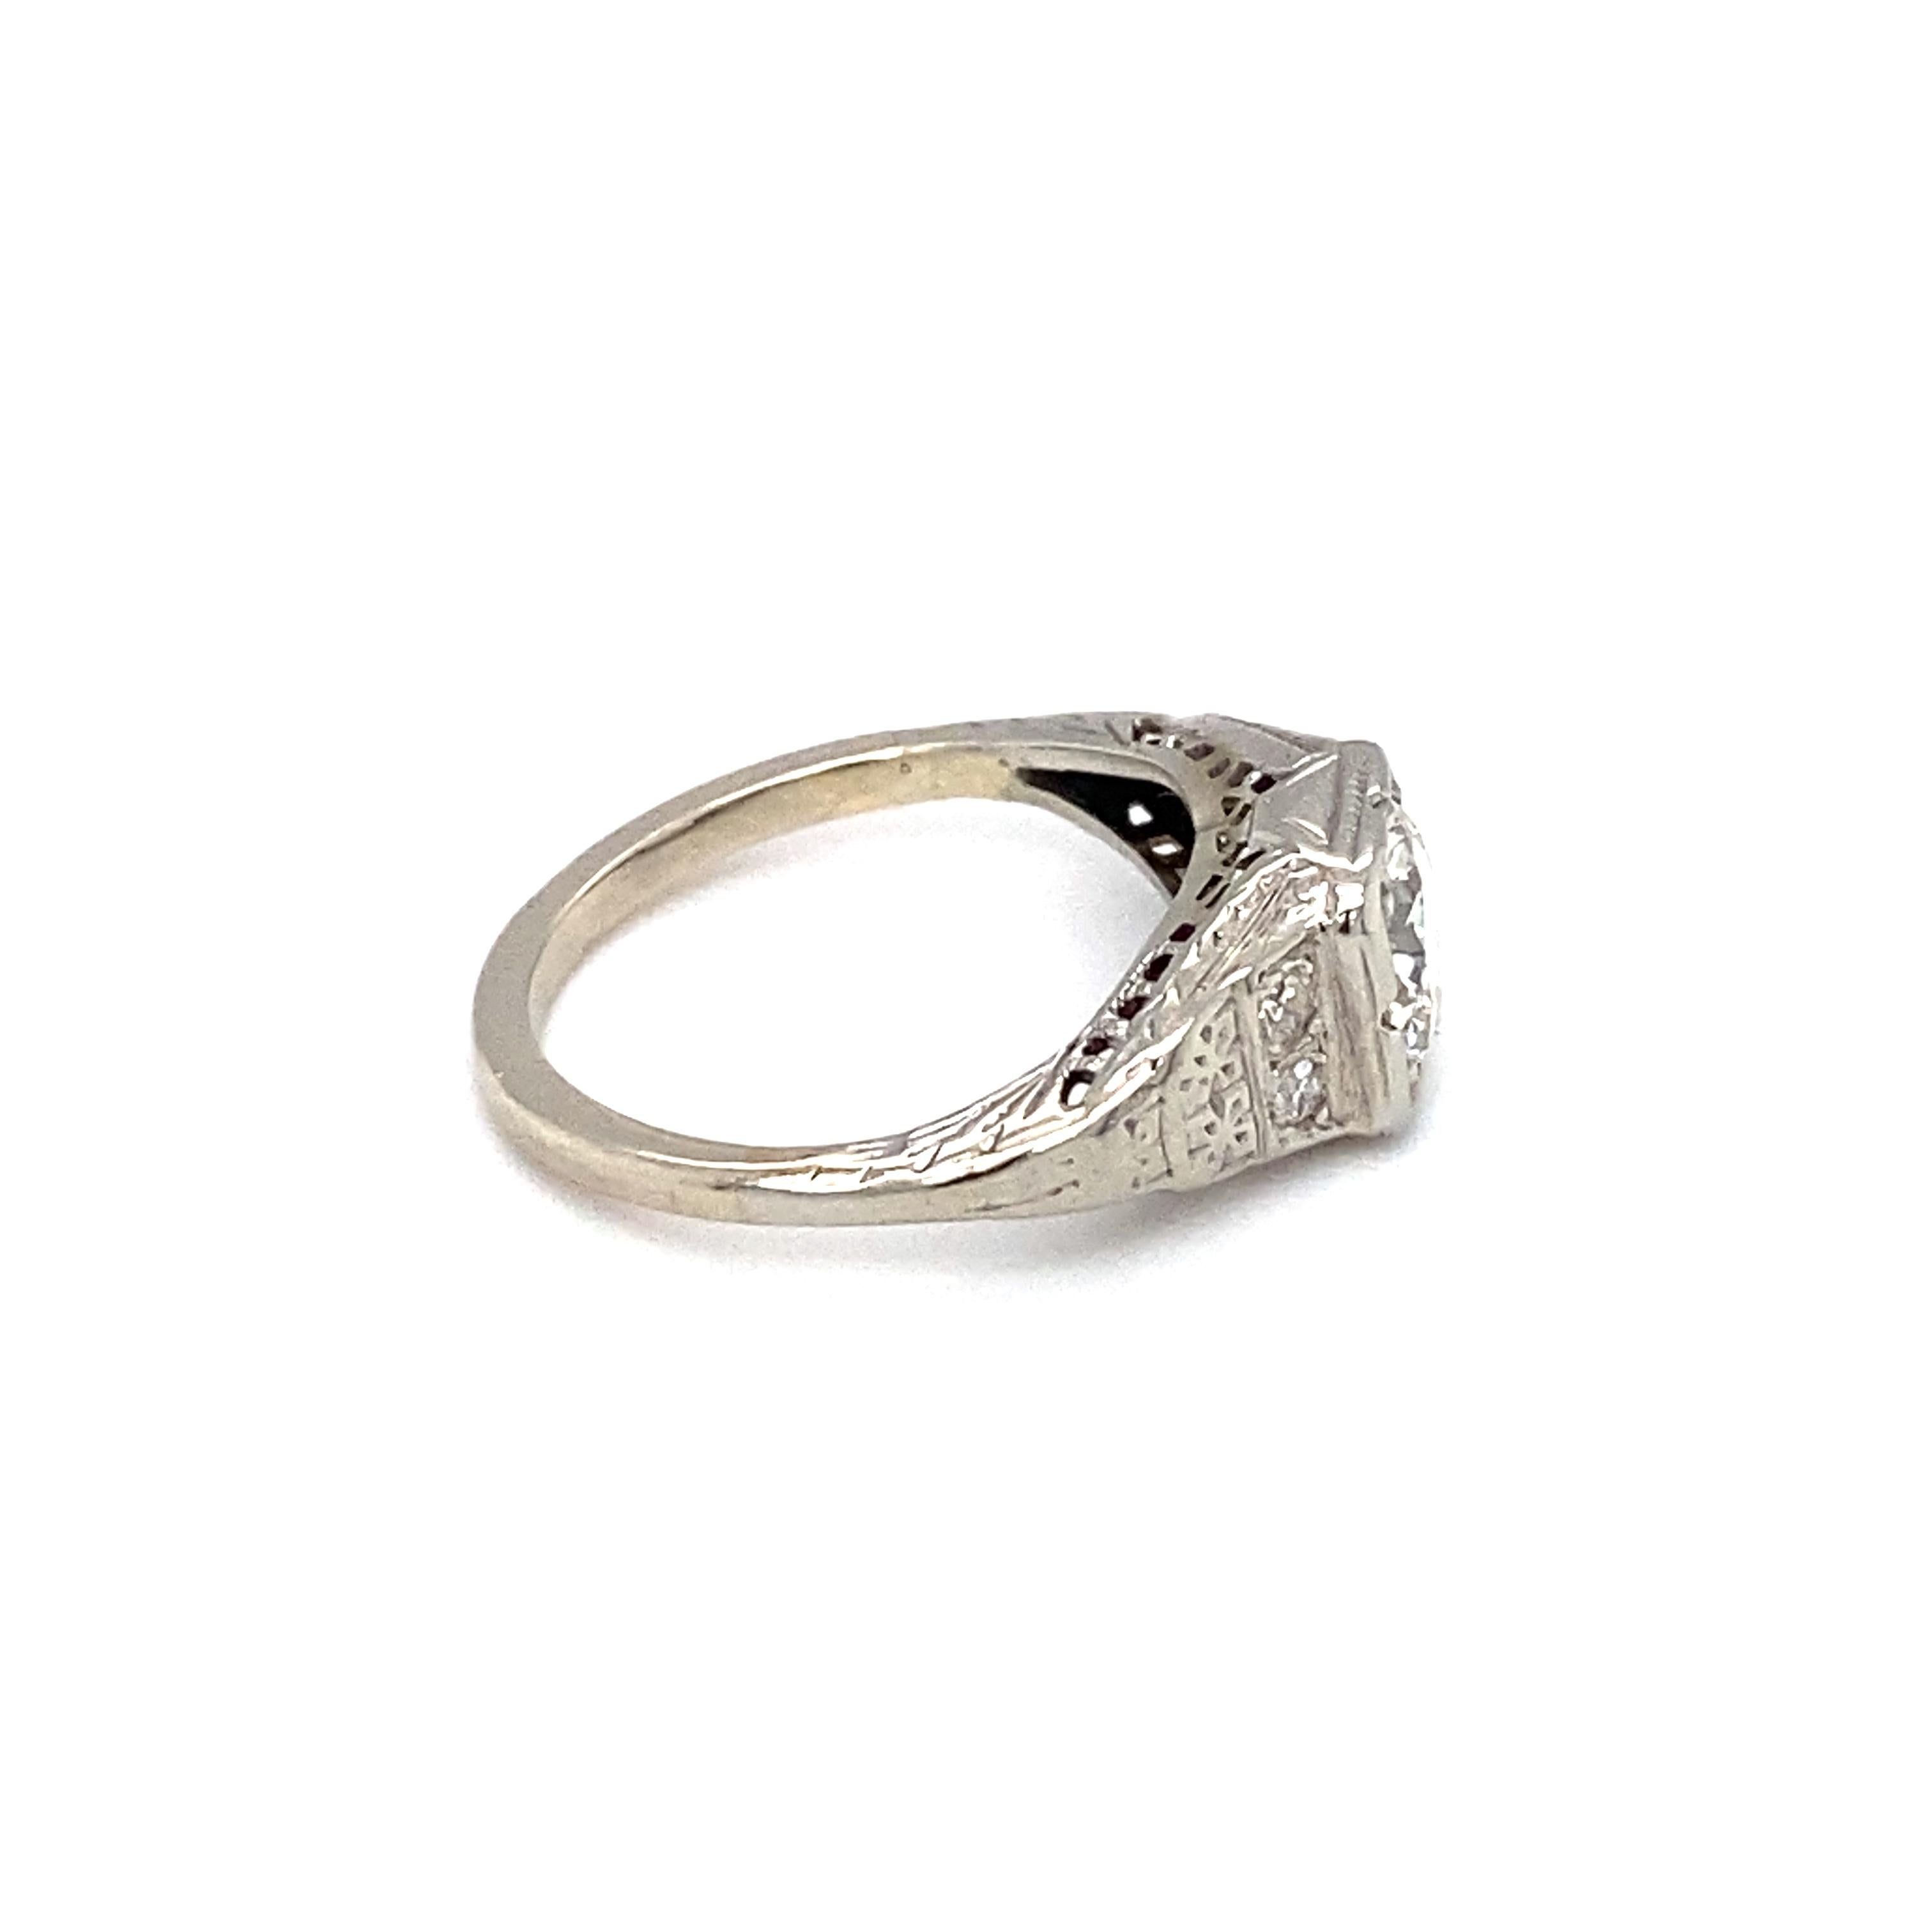 Item Details: This elegant vintage ring has a center diamond at 0.85 carats with accent diamonds on the sides.

Circa: 1940s
Metal Type: Platinum and 14k white gold
Weight: 2.4g
Size: US 4.25, resizable

Diamond Details:

Carat: 0.85 carat